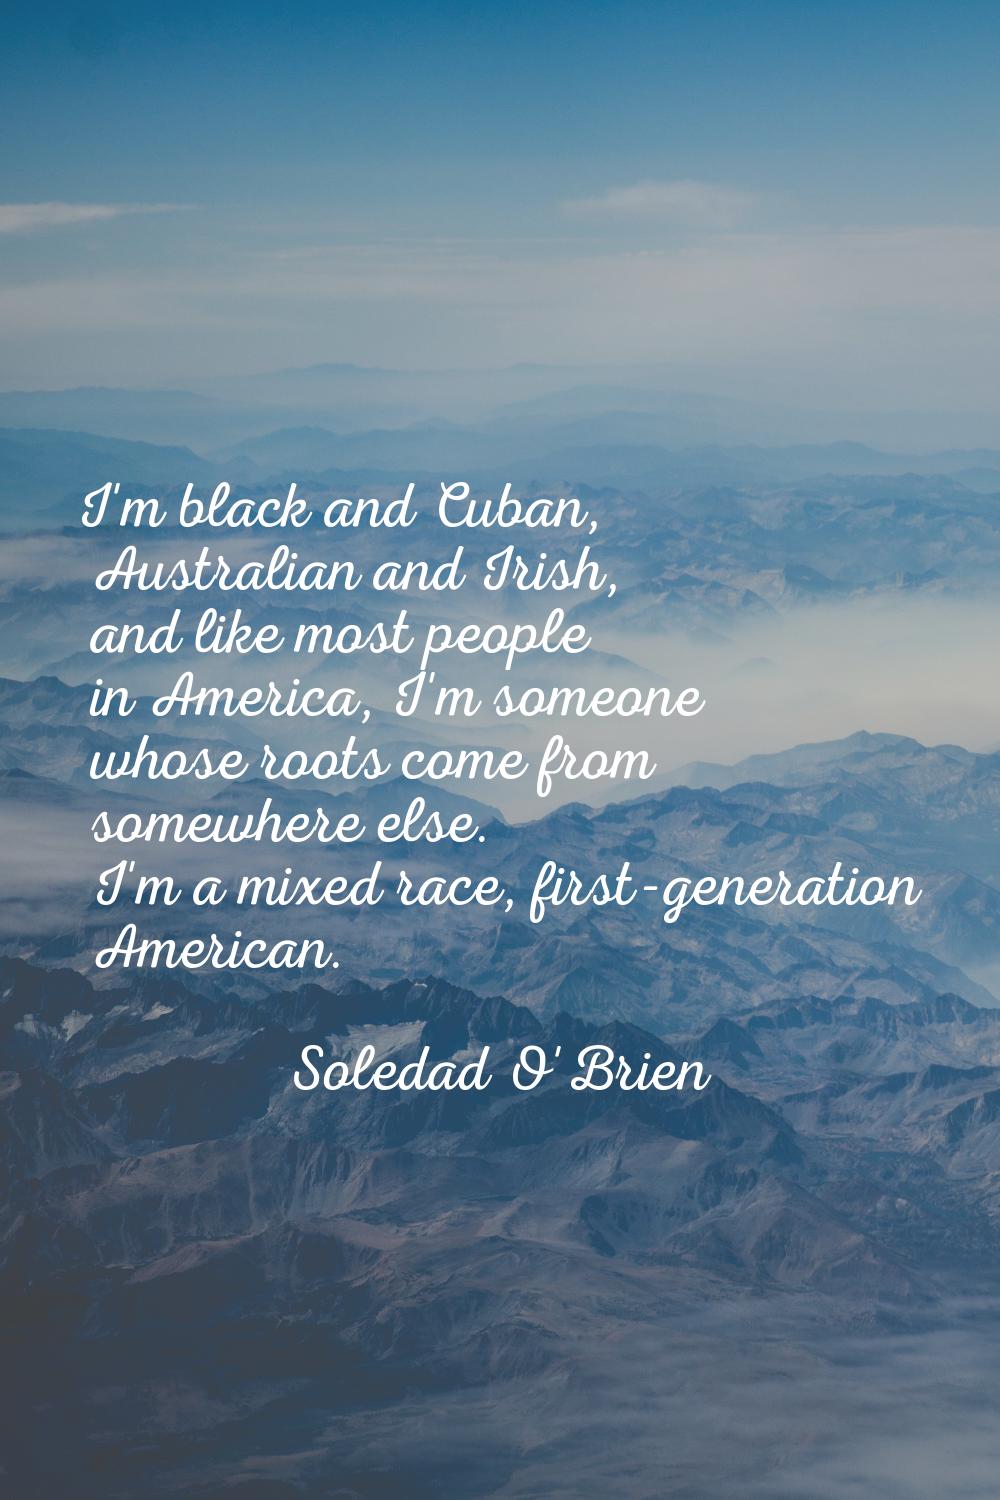 I'm black and Cuban, Australian and Irish, and like most people in America, I'm someone whose roots